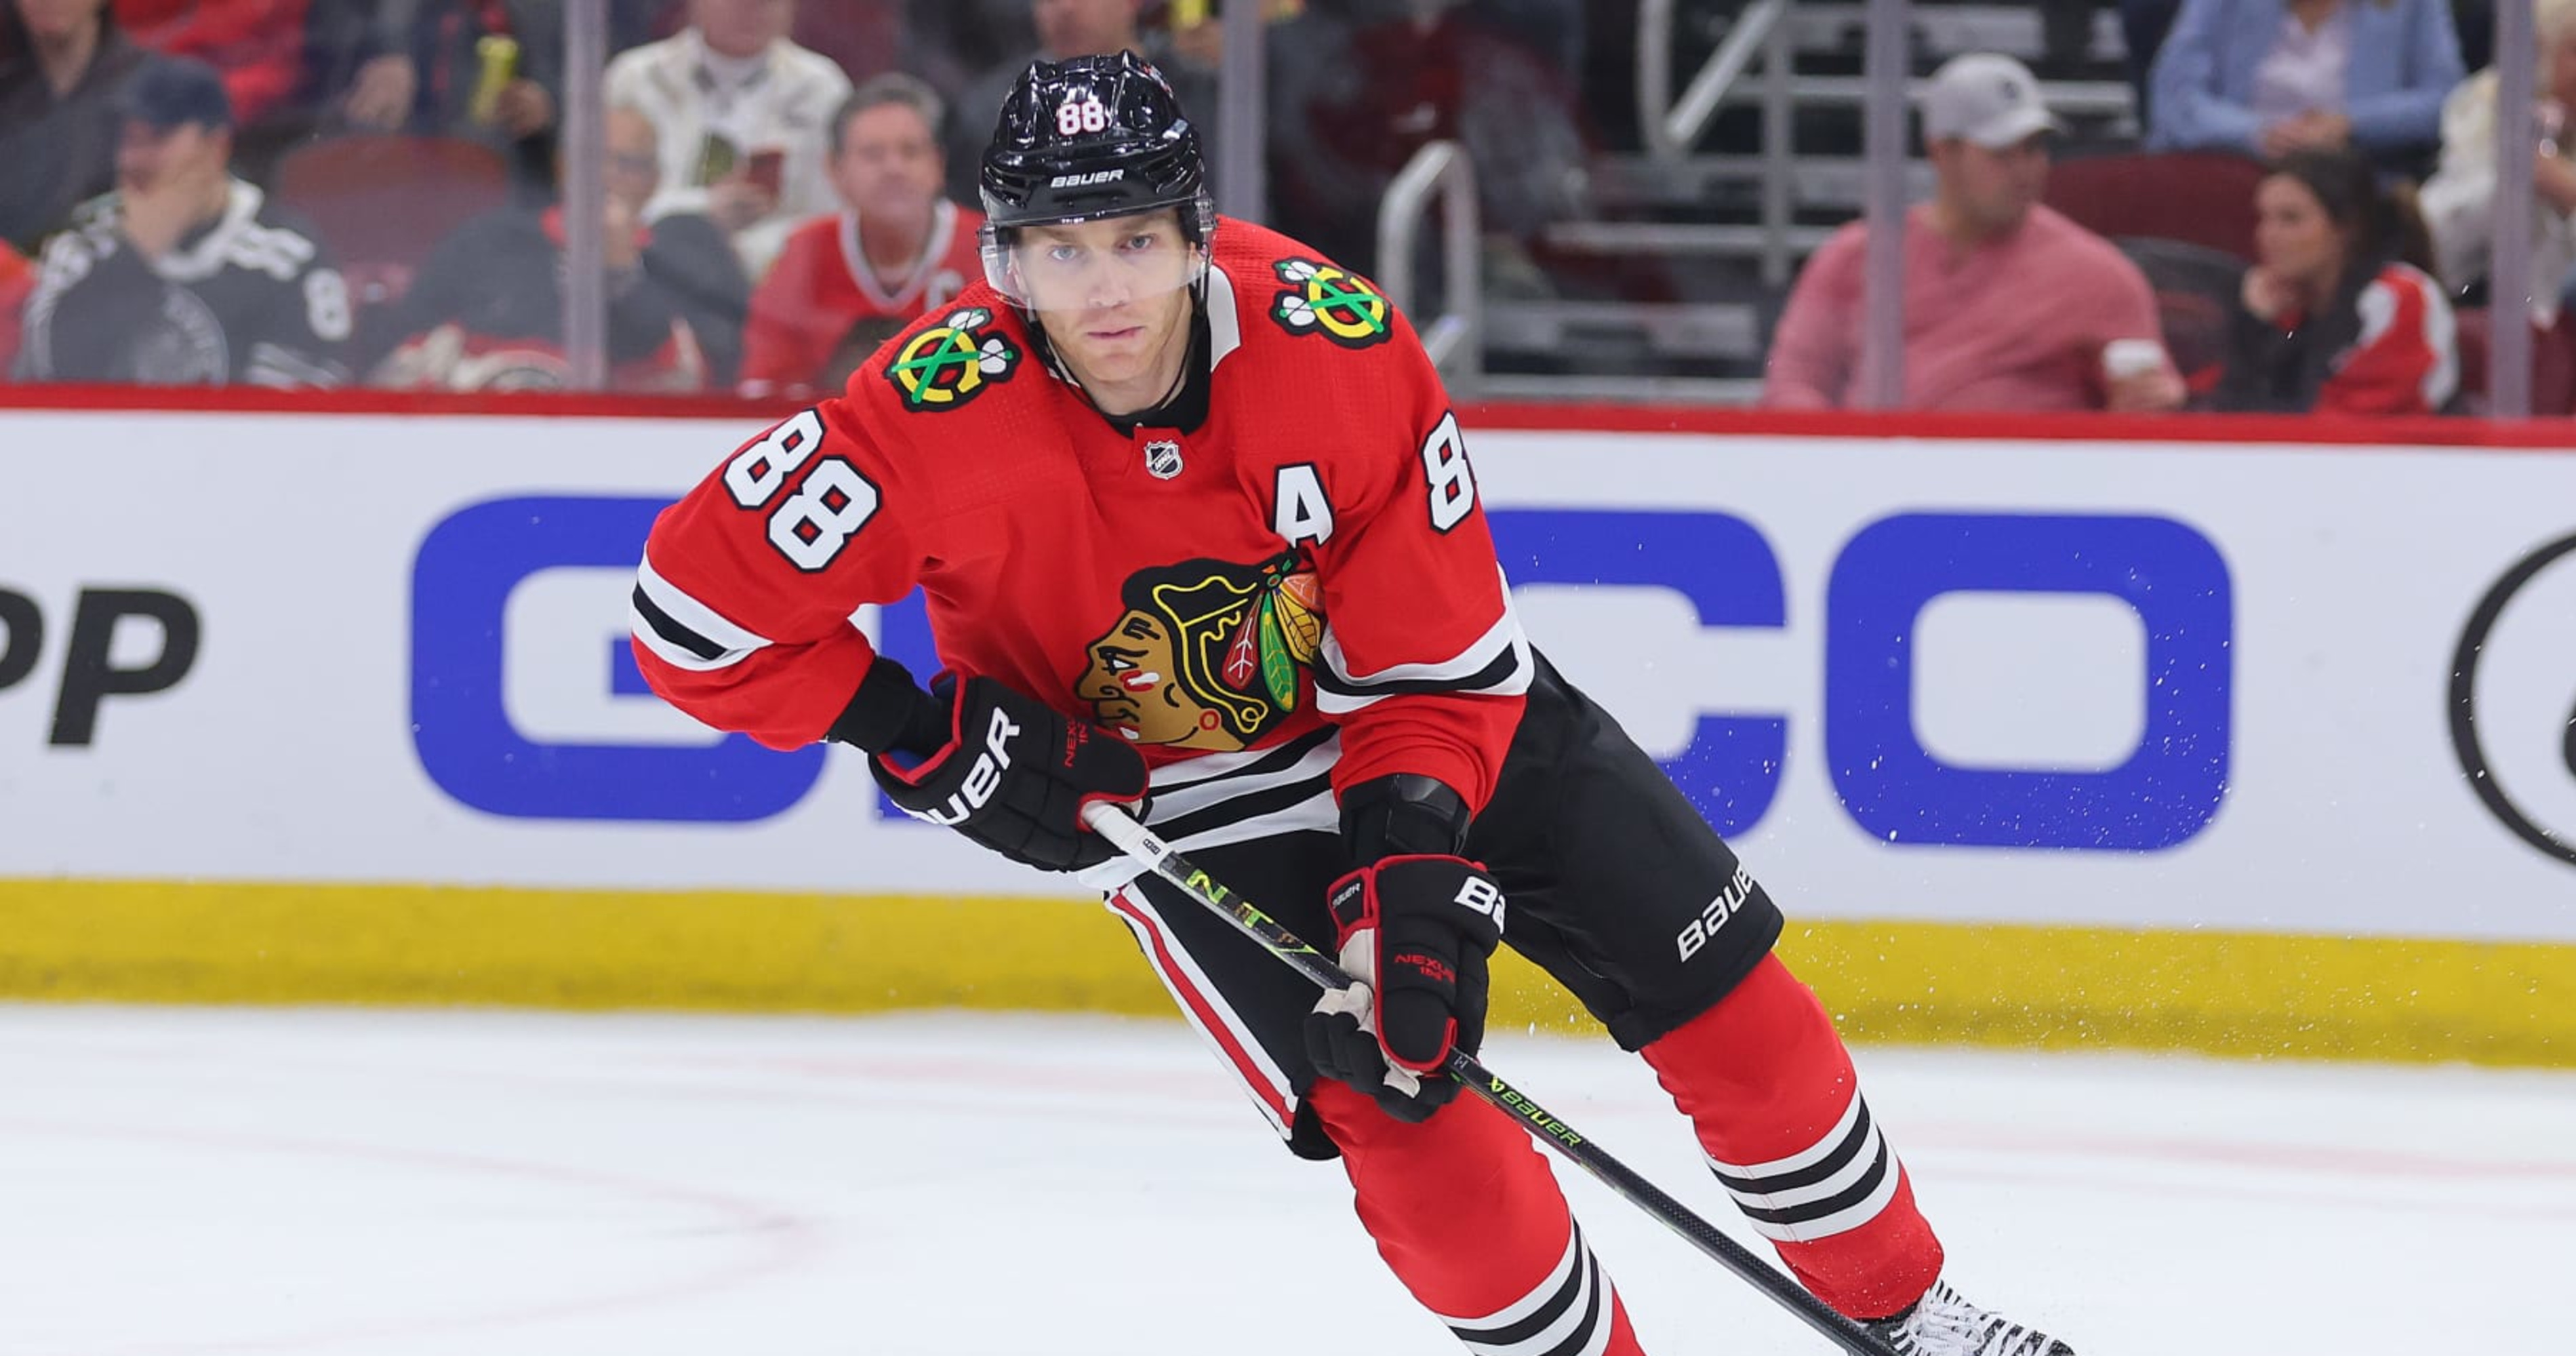 Patrick Kane is a New York Ranger!! Rangers acquire Kane for just